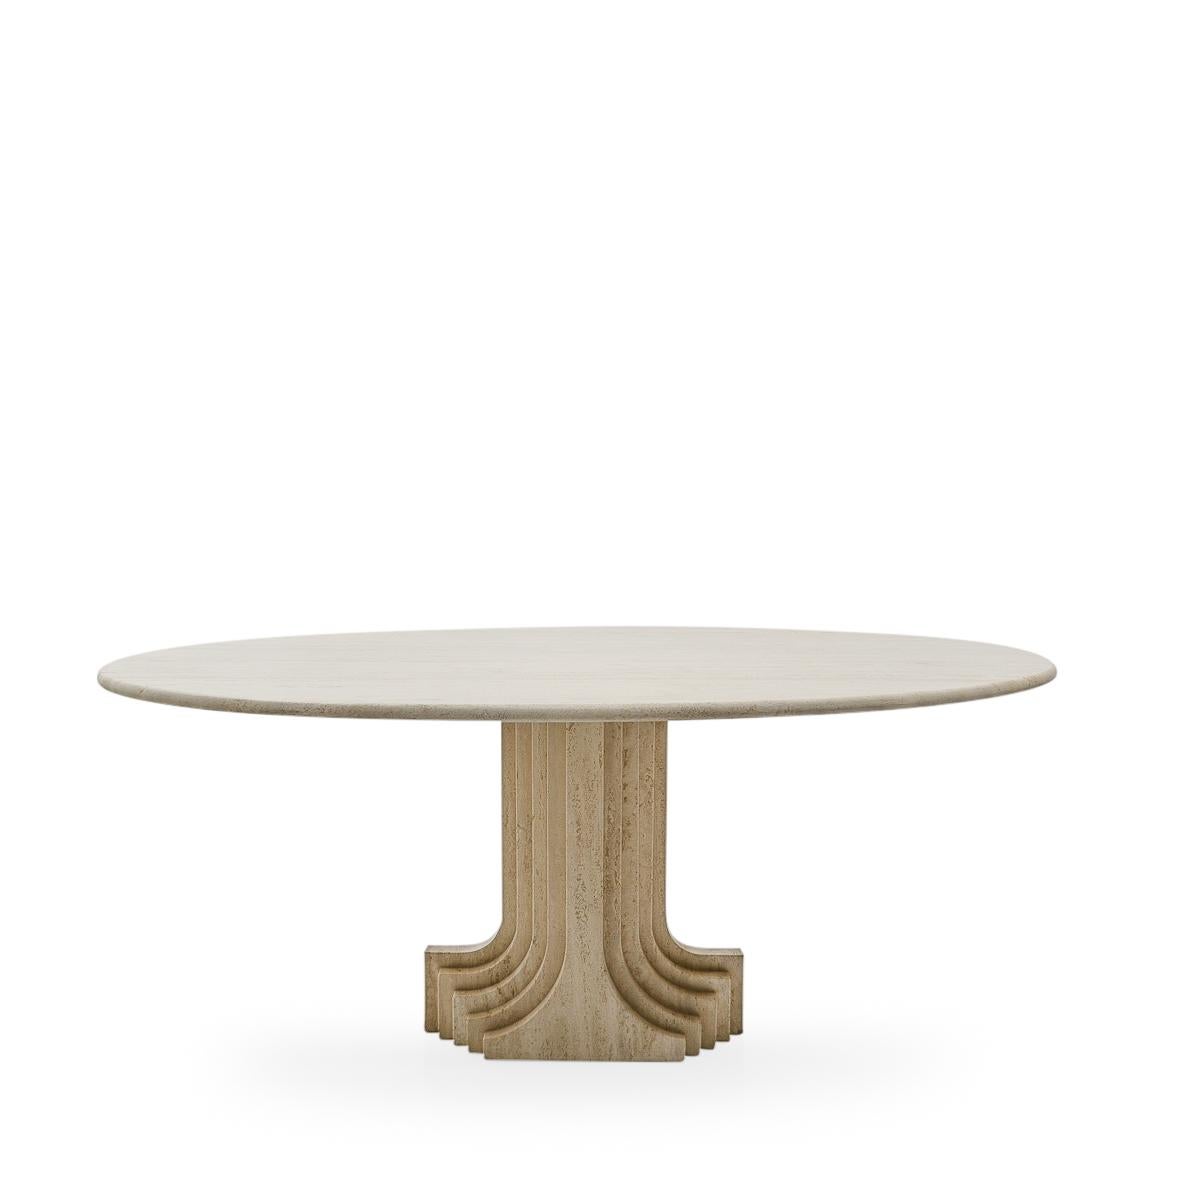 Post-Modern Sculptural Carlo Scarpa Travertine Dining Table, by Cattelan Italia, 1970s For Sale